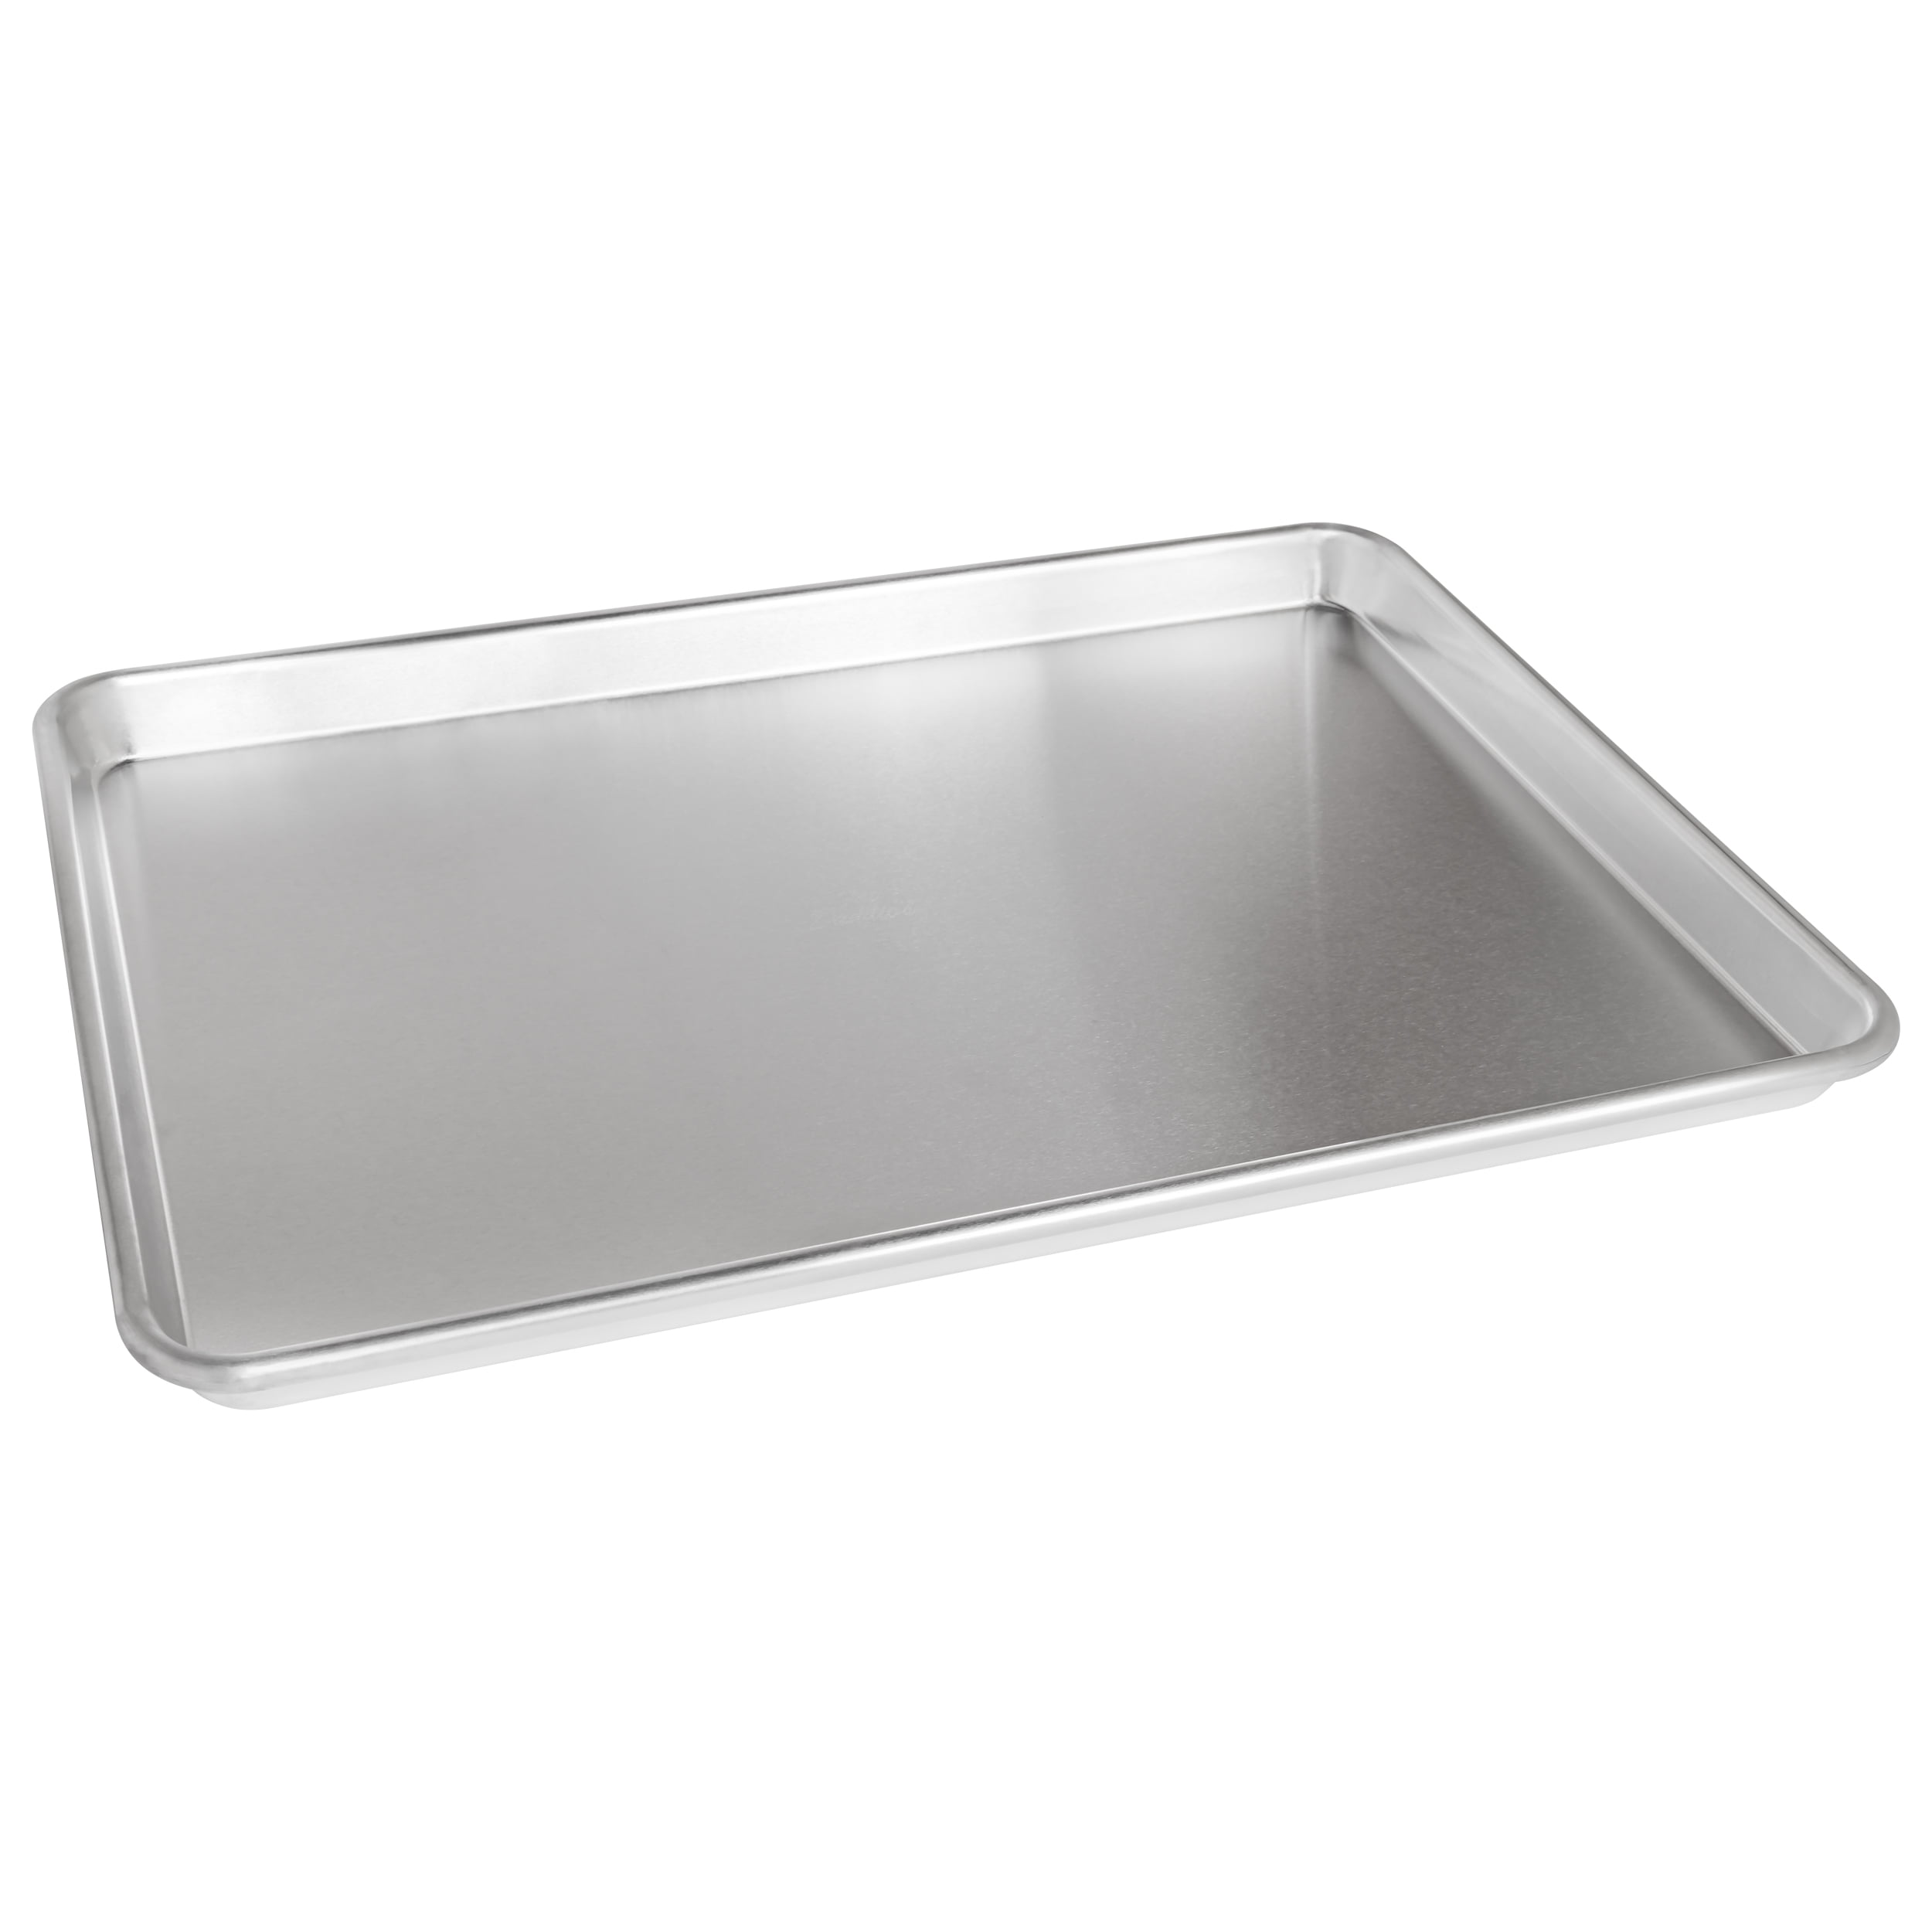 Nordic Ware Naturals Quarter Sheet with Oven-Safe Nonstick Grid